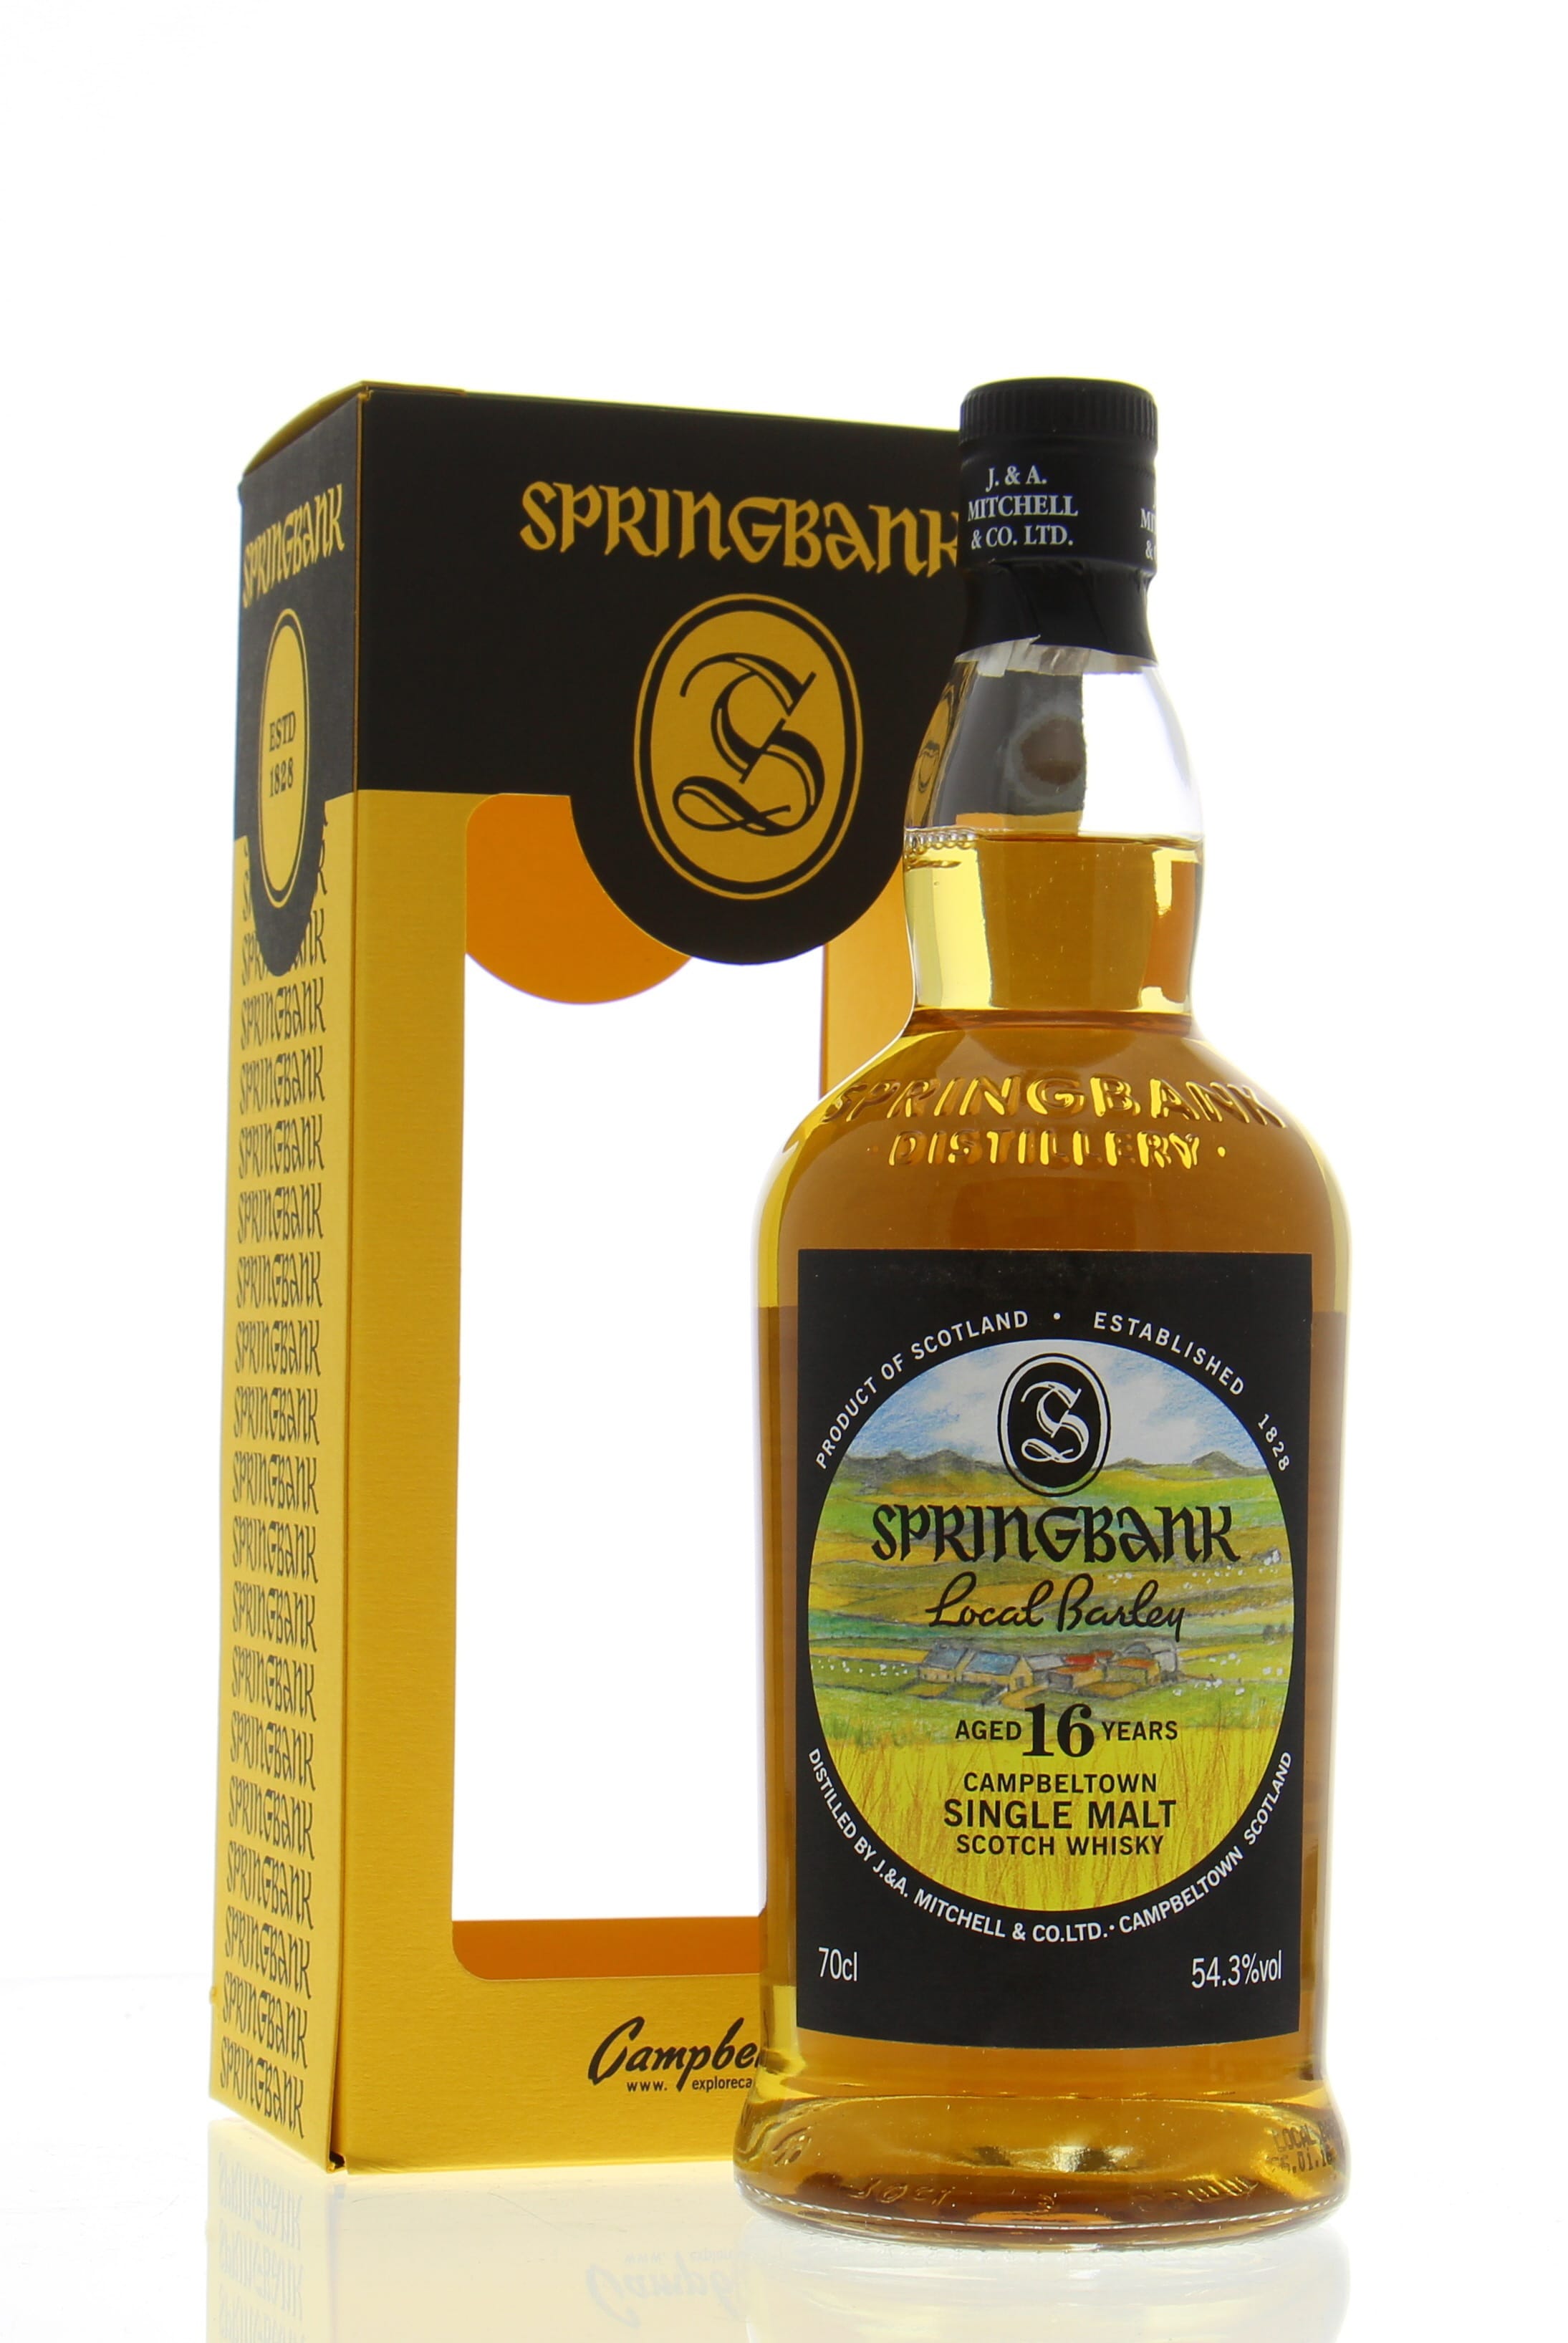 Springbank - 16 Years Old Local Barley 54.3% 1999 In Original Container